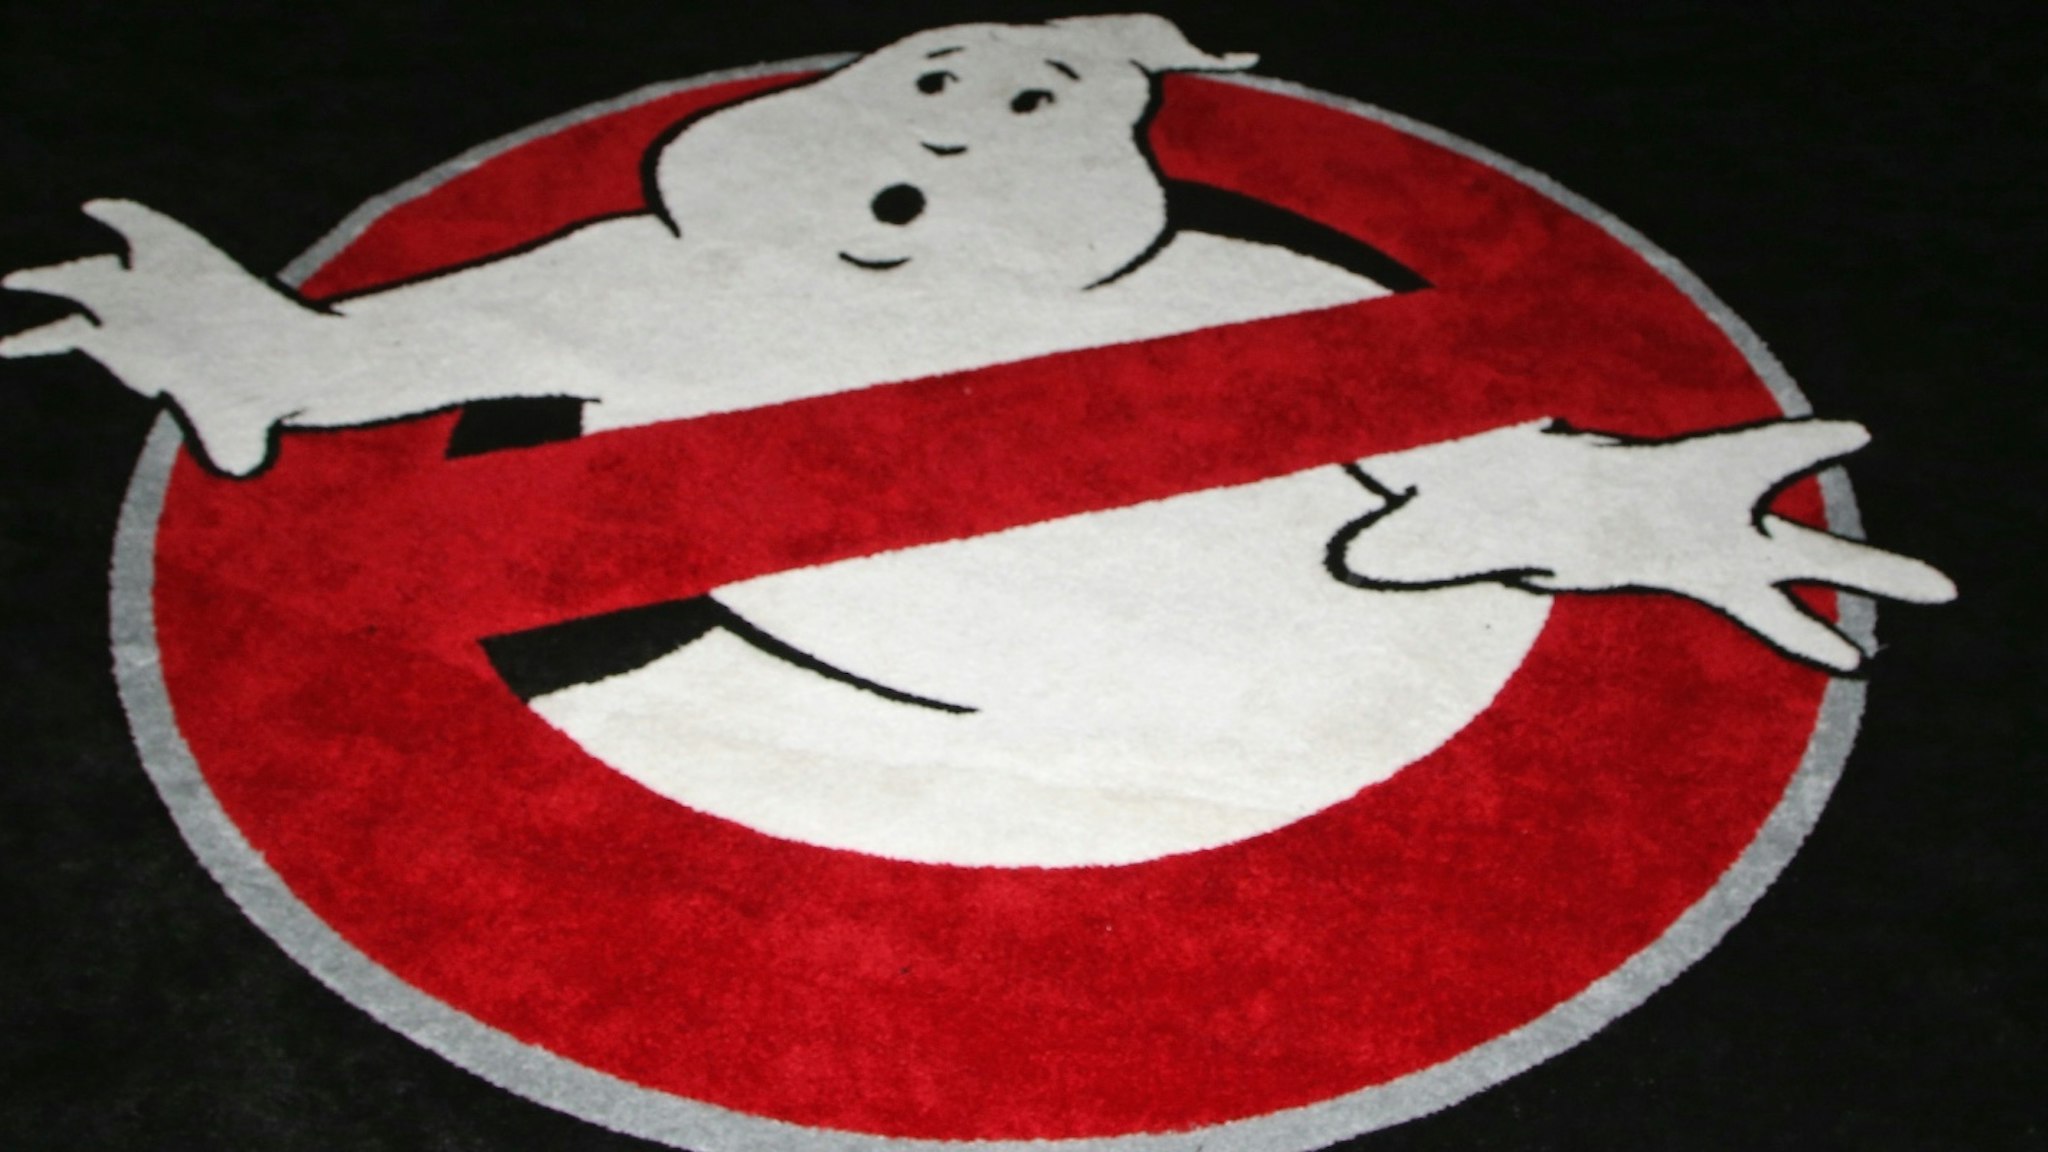 A logo for the movie "Ghostbusters" is displayed during Sony Pictures Entertainment's exclusive product presentation highlighting 2016 films at The Colosseum at Caesars Palace during CinemaCon, the official convention of the National Association of Theatre Owners, on April 12, 2016 in Las Vegas, Nevada.